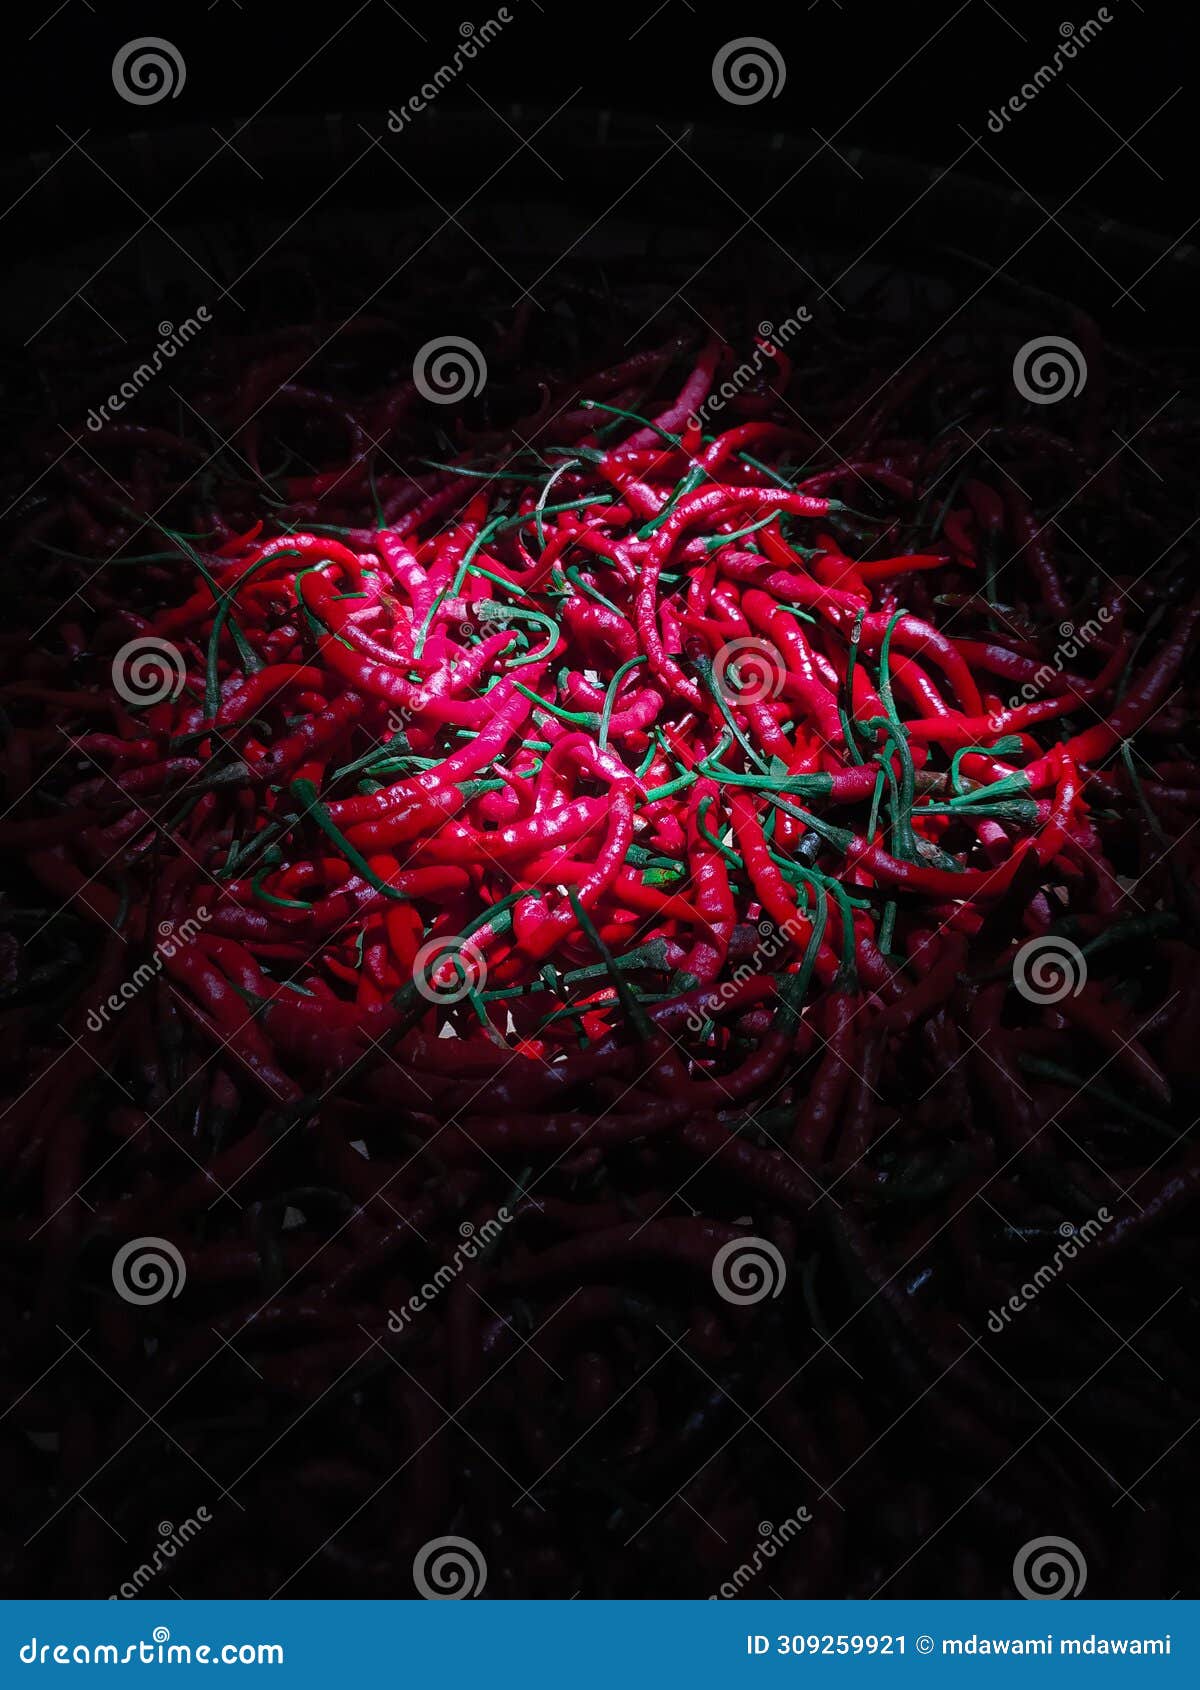 red chilies are synonymous with spicy taste and are usually used to add a spicy taste to food.